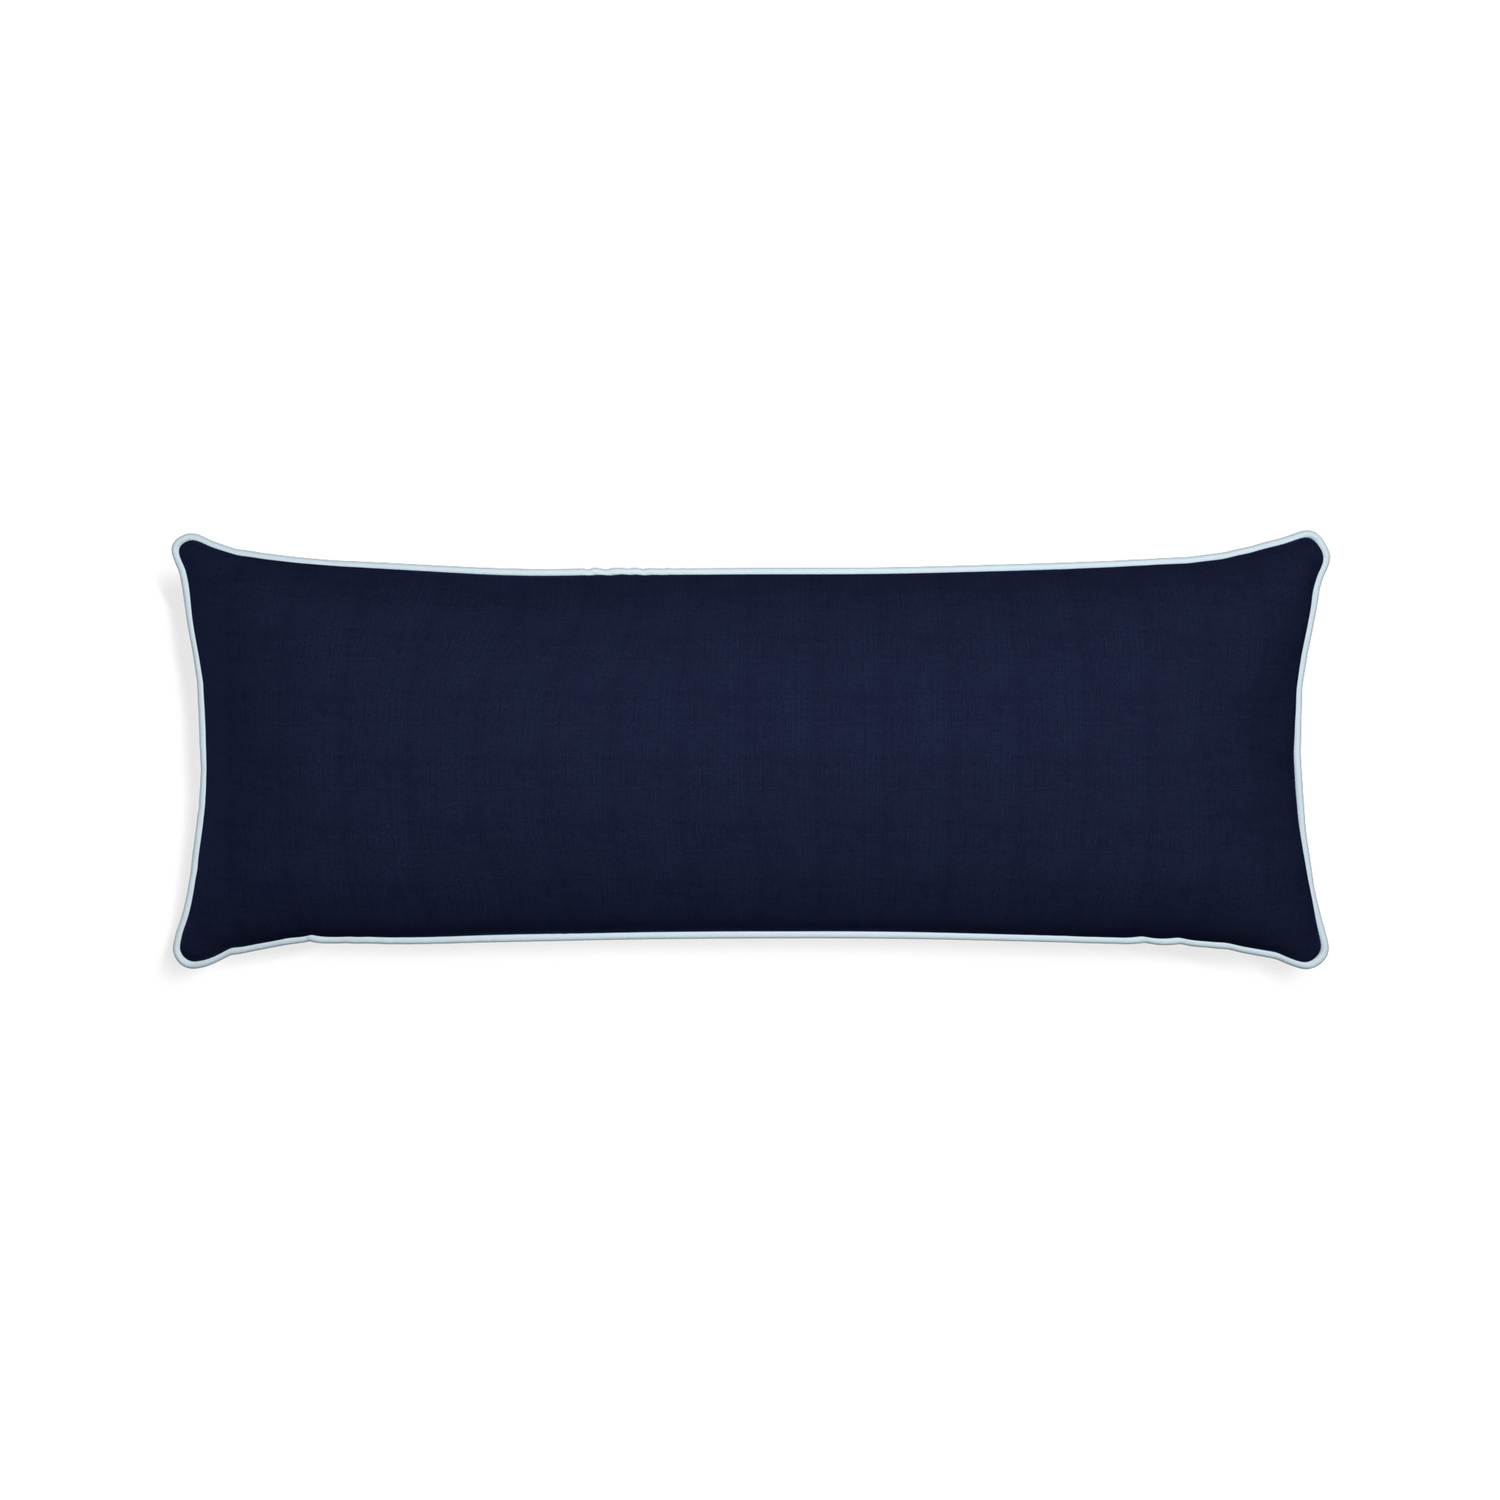 Xl-lumbar midnight custom navy bluepillow with powder piping on white background